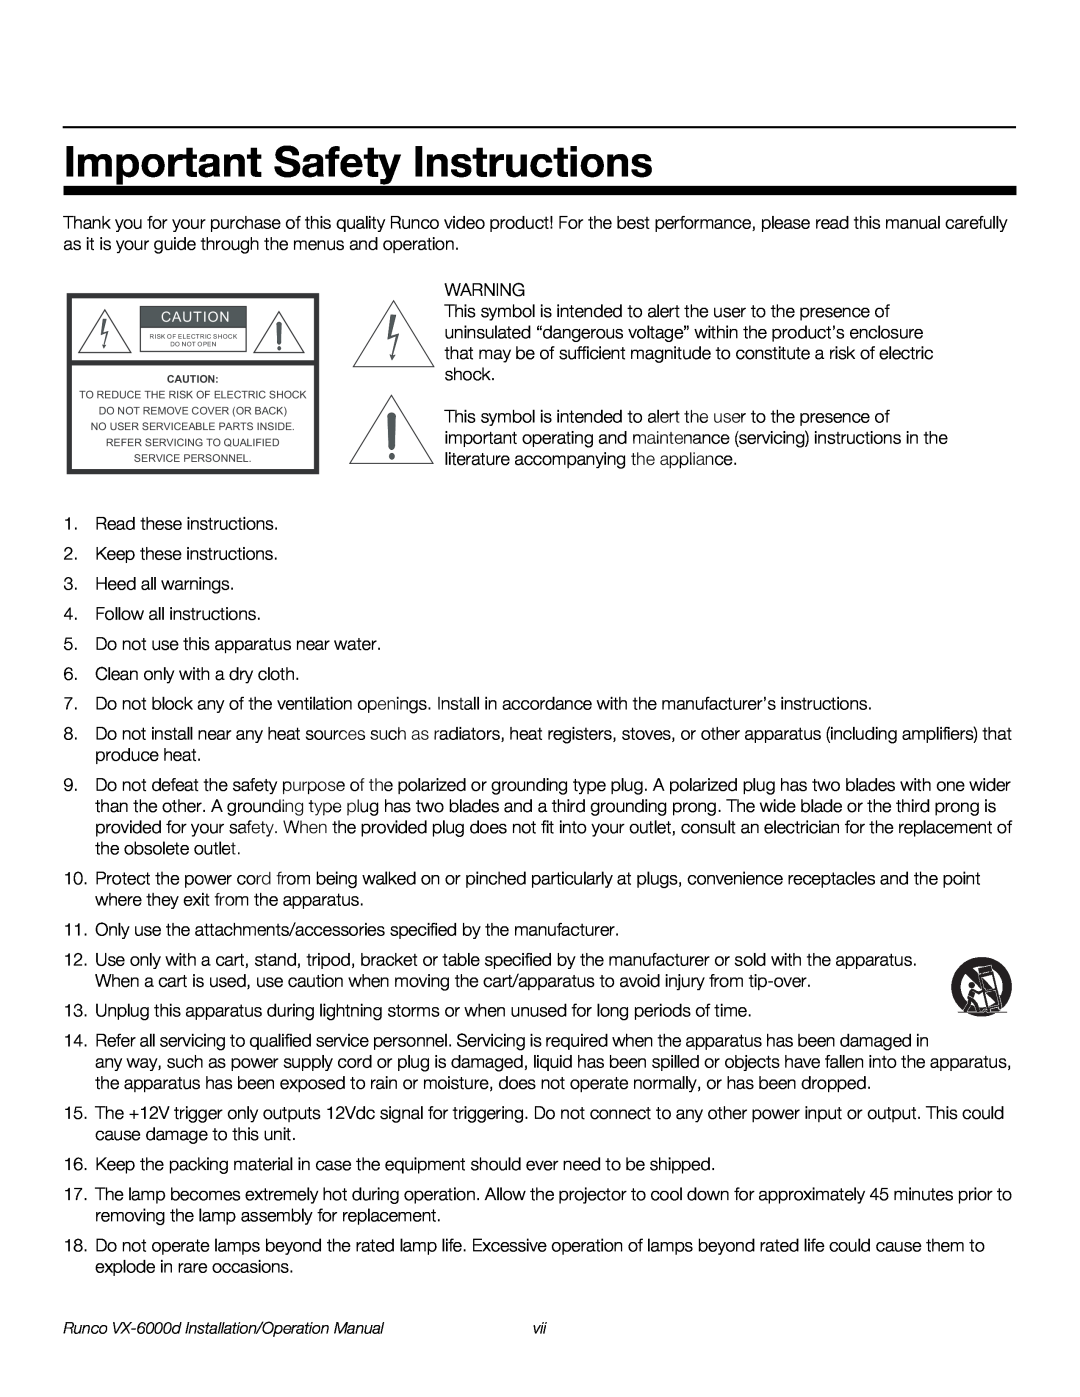 Runco VX-6000D operation manual Important Safety Instructions 